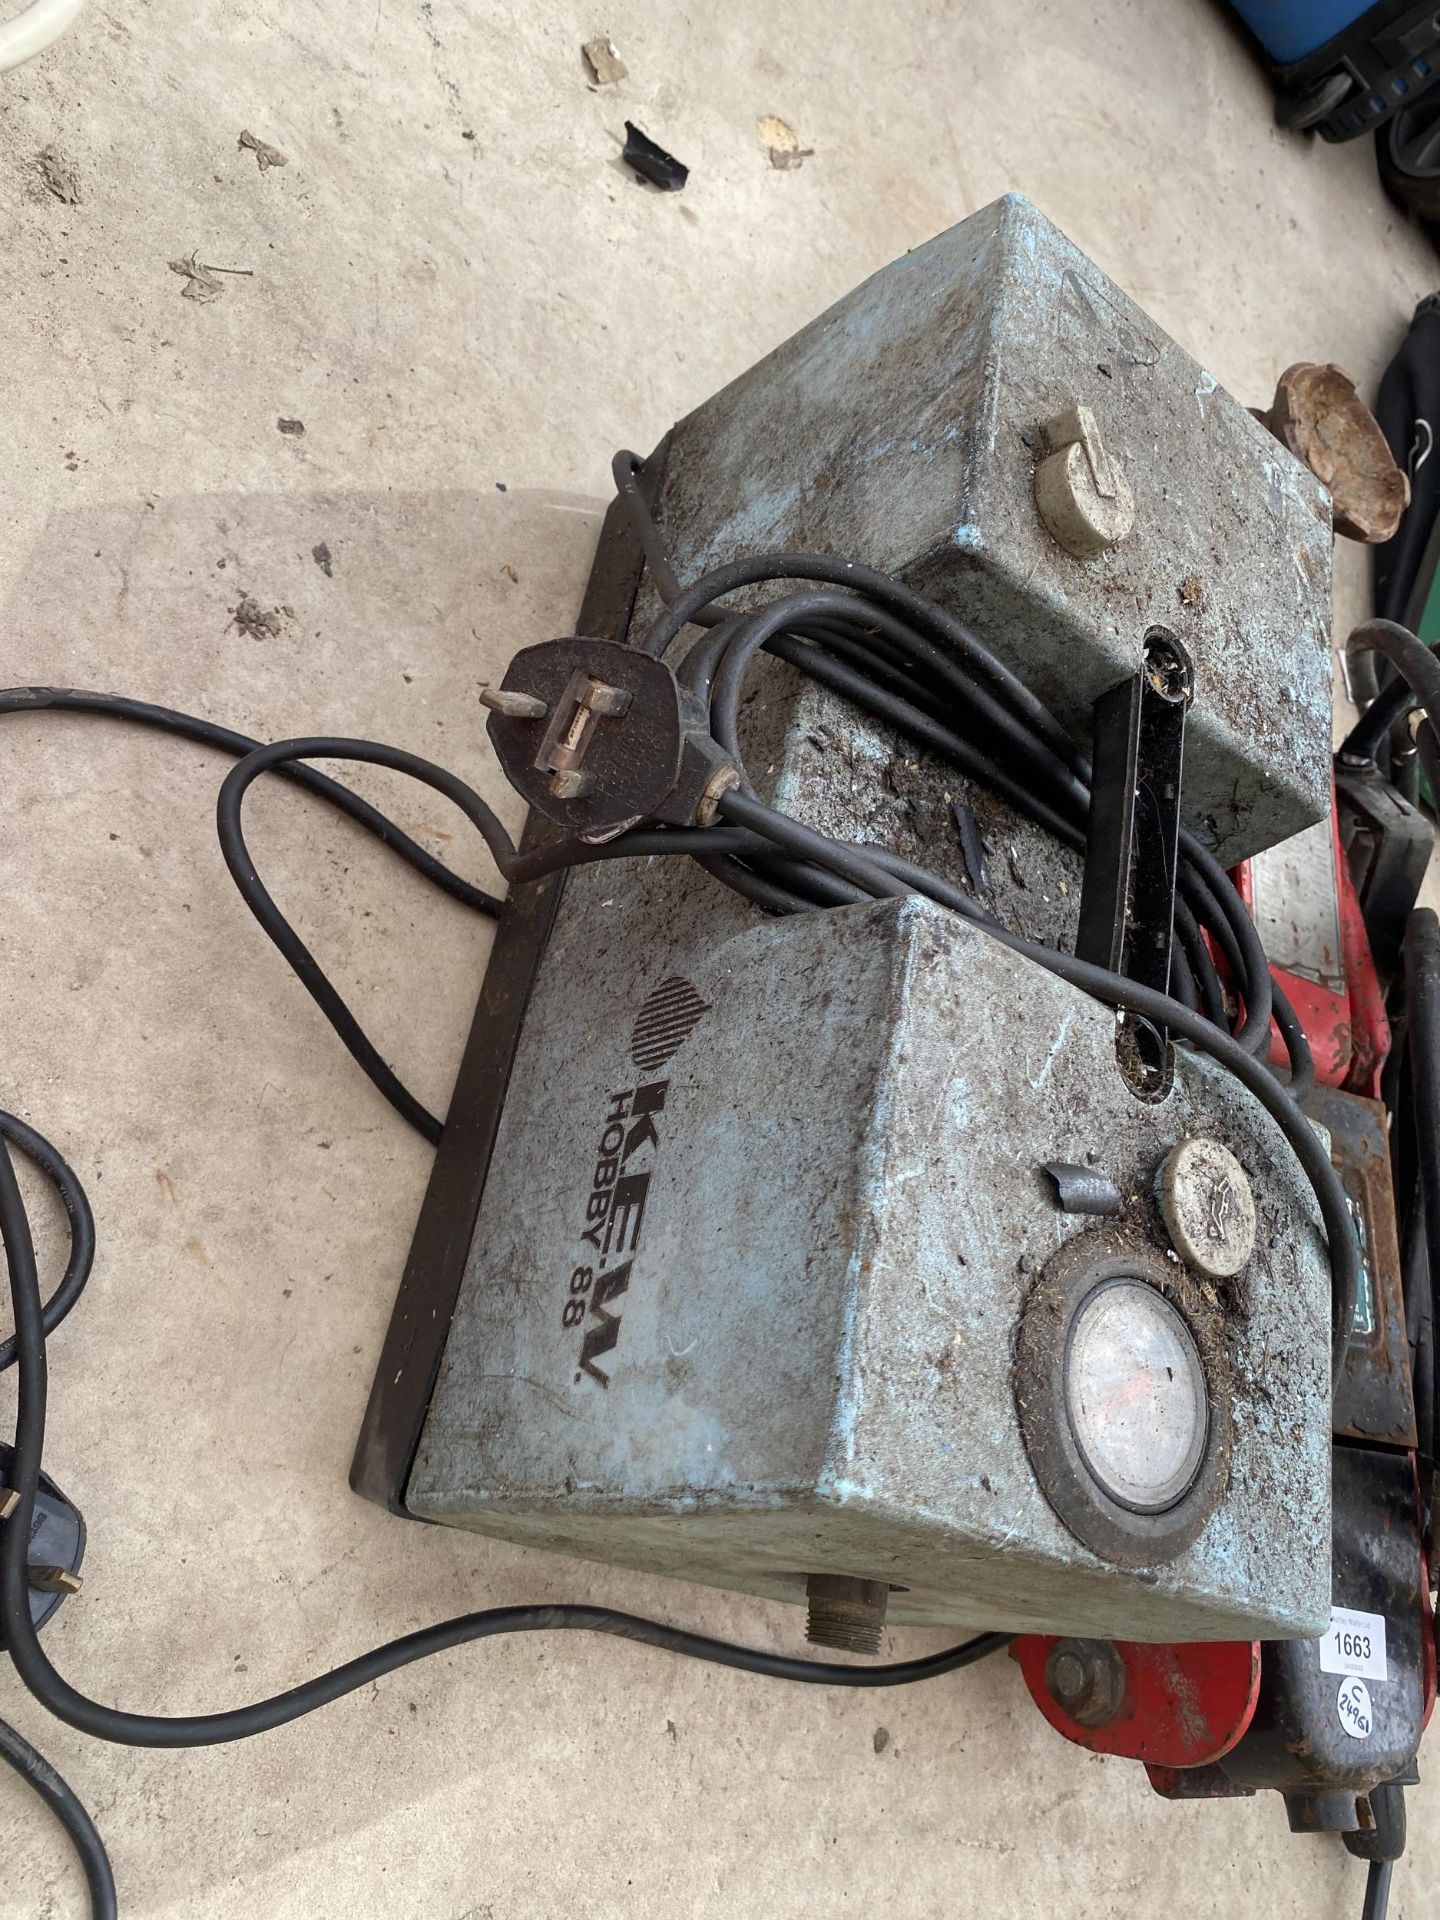 2 X ITEMS - A KEW HOBBY 88 PRESSURE WASHER AND HYDRAULIC FLOOR JACK - Image 3 of 4